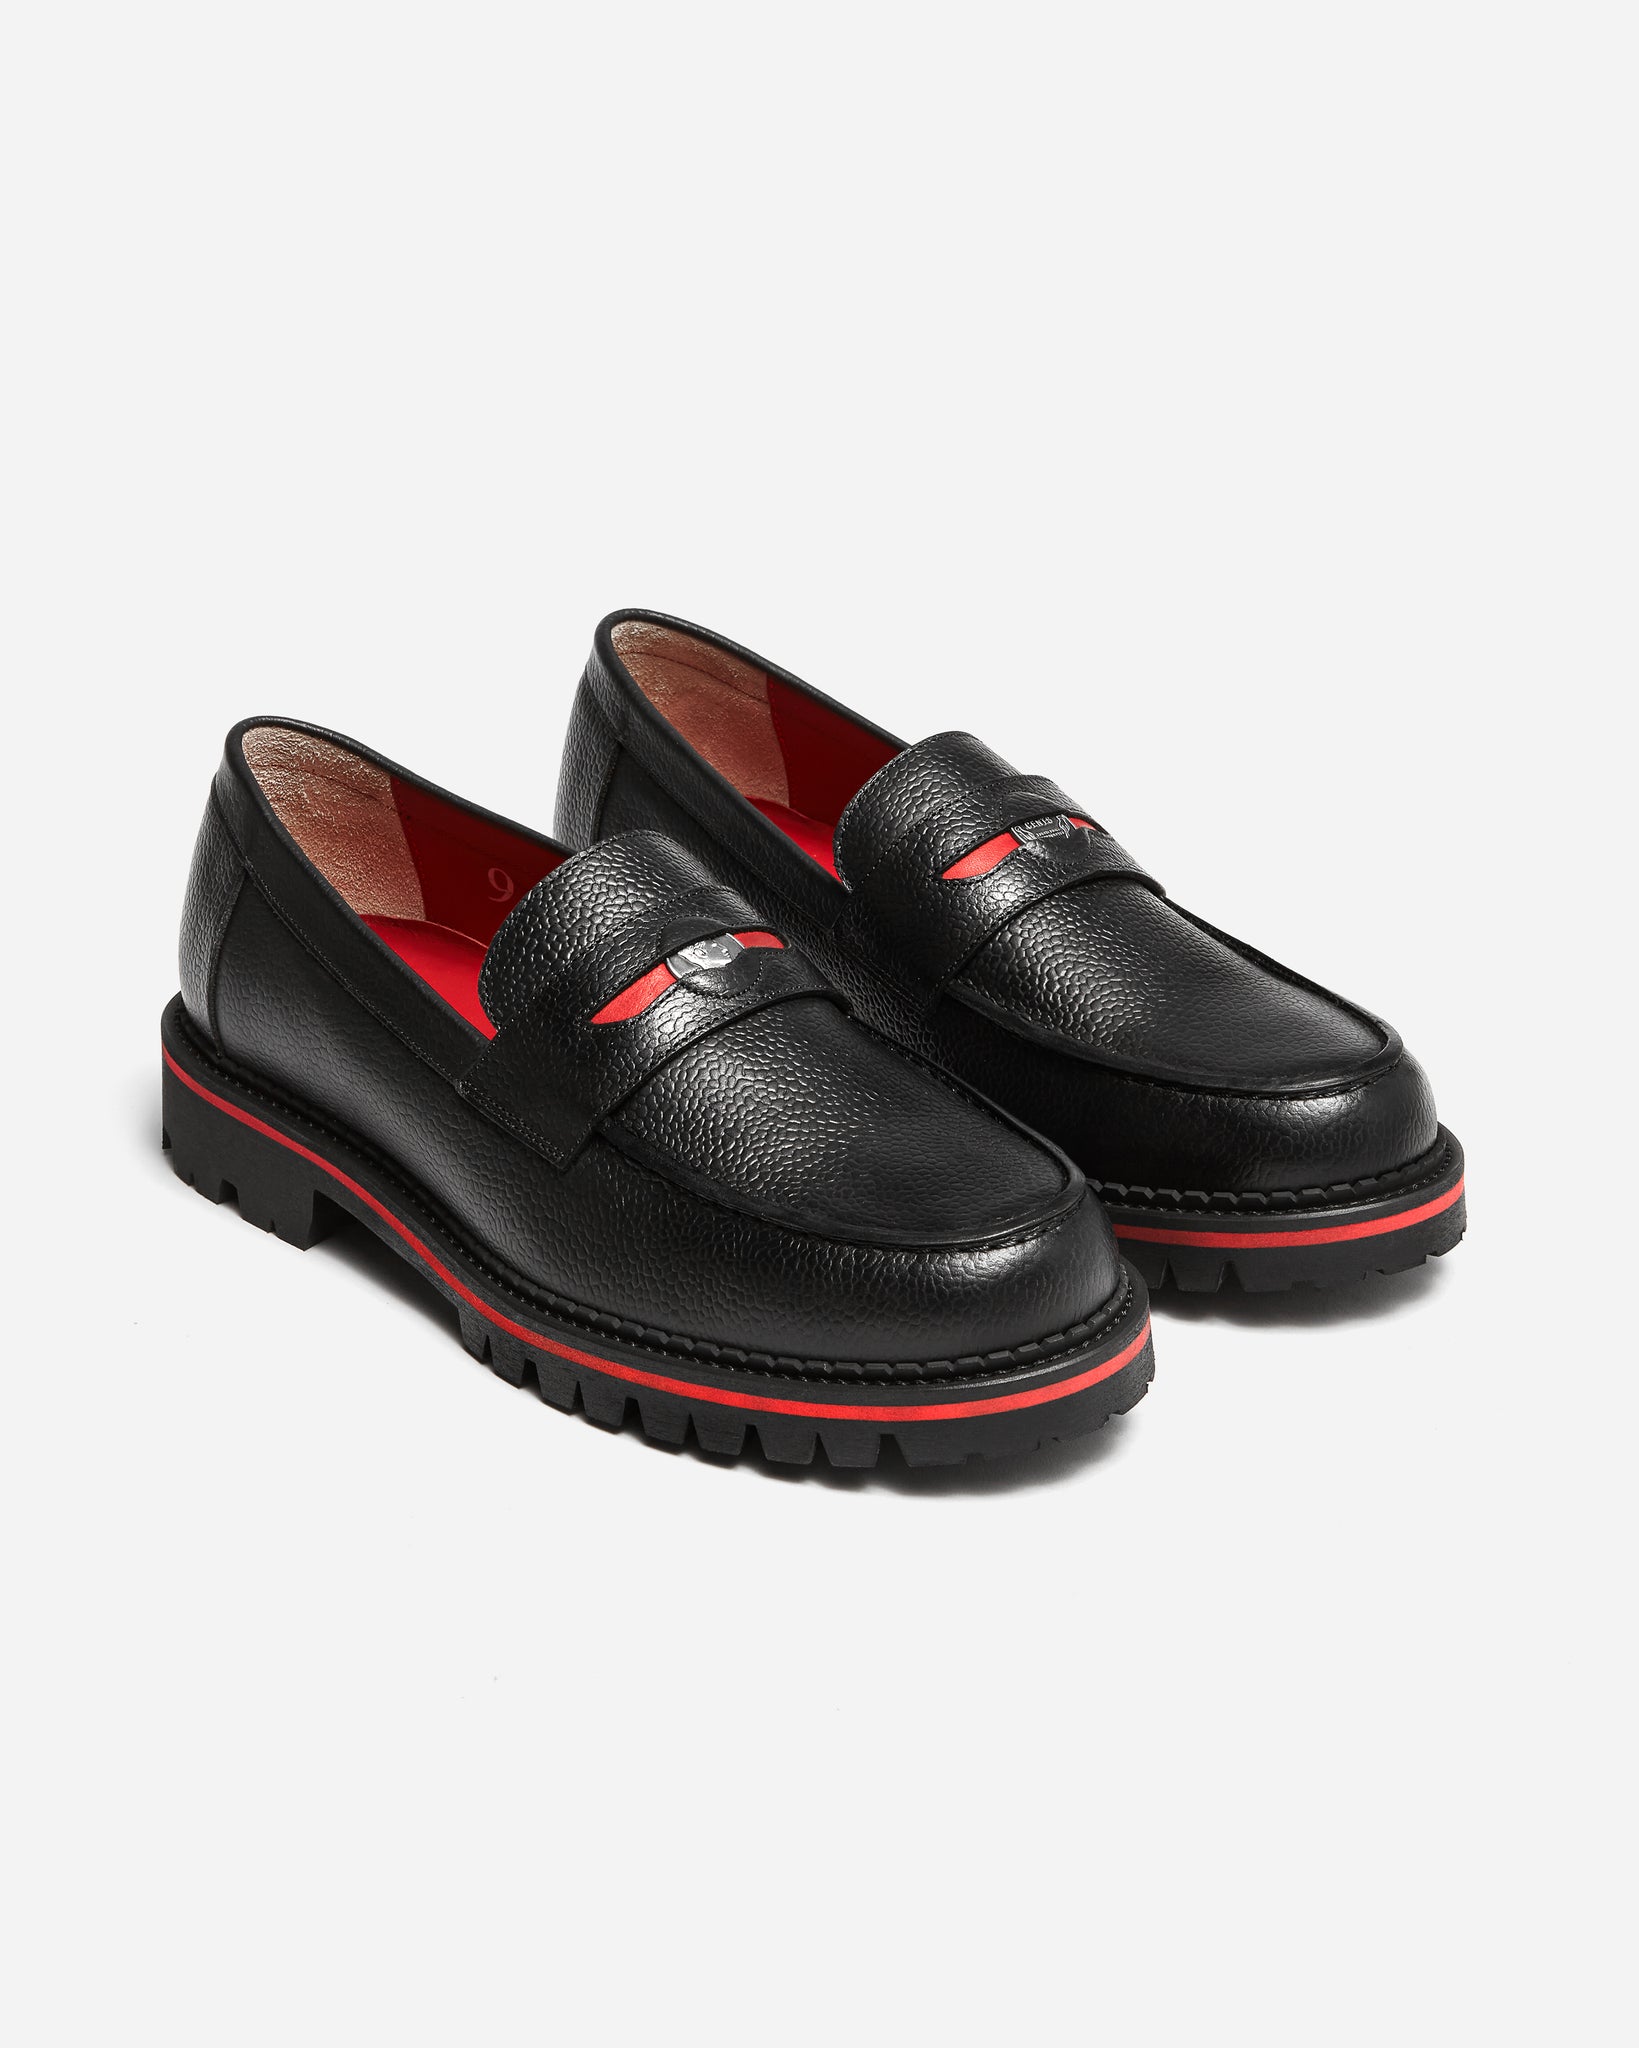 Two Cent Loafer